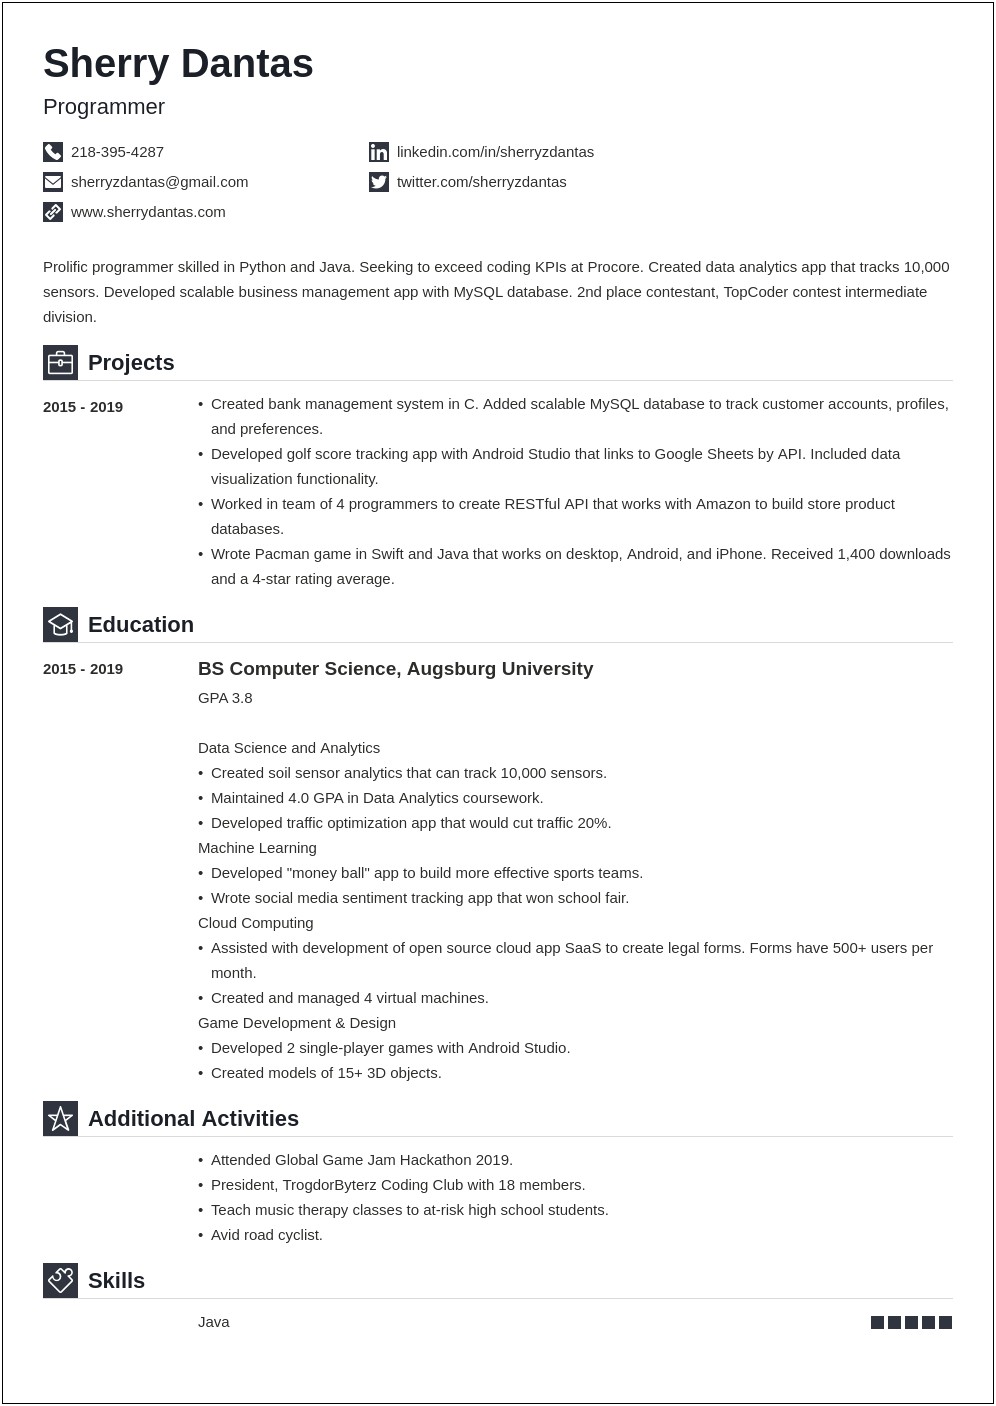 Resume Examples Right Out Of College